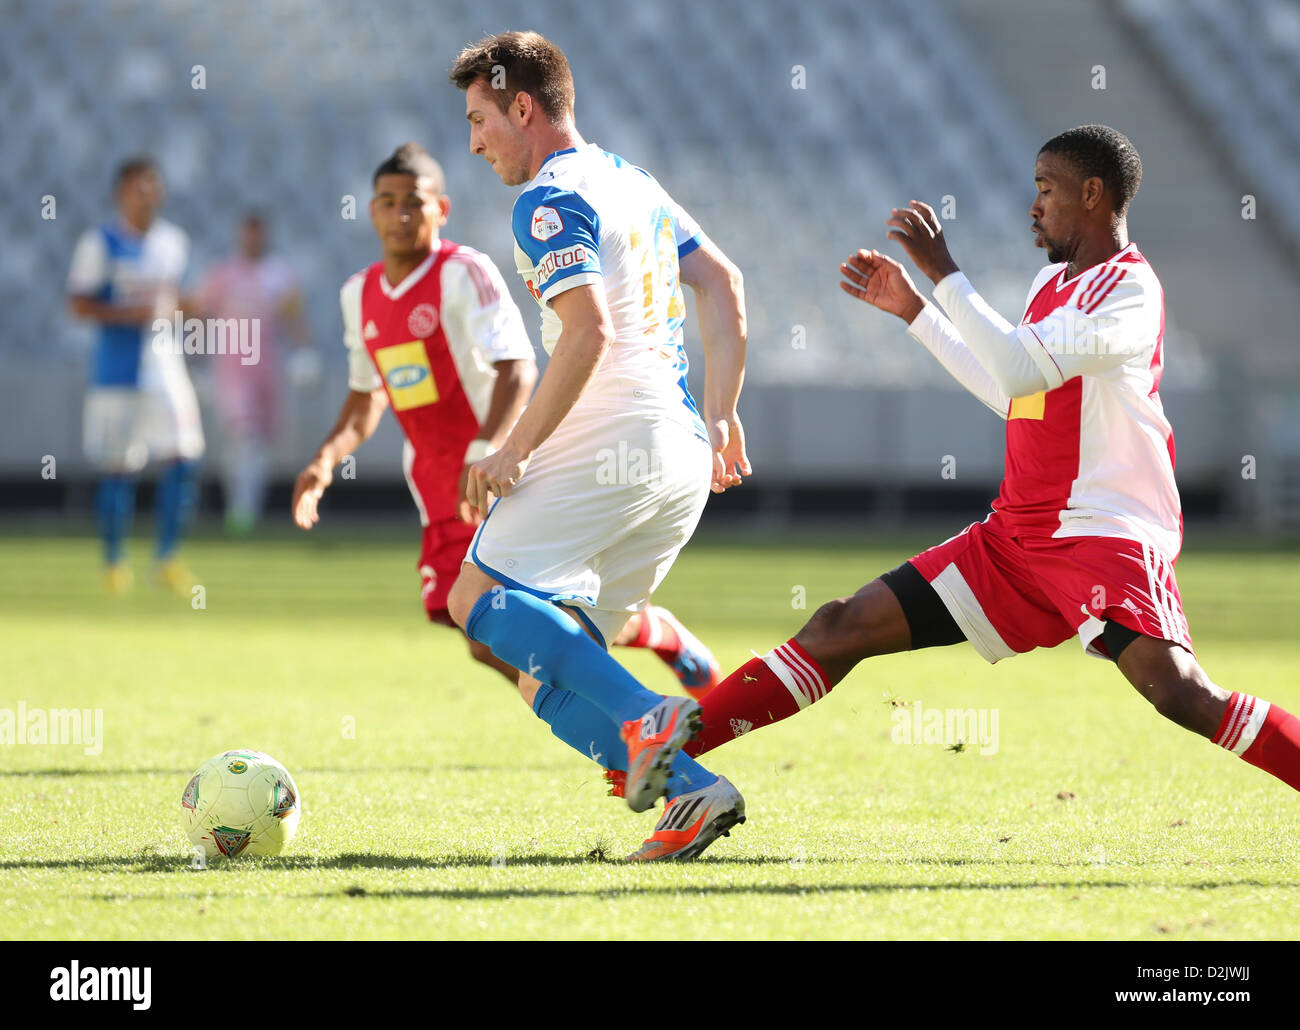 CAPE TOWN, South Africa - Saturday 26 January 2013, Izet Hajrovic of Grasshopper Club Zurich is challenged by Abia Nale of Ajax Cape Town during the soccer/football match Grasshopper Club Zurich (Switzerland) and Ajax Cape Town at the Cape Town stadium. Photo by Roger Sedres/ImageSA/ Alamy Live News Stock Photo